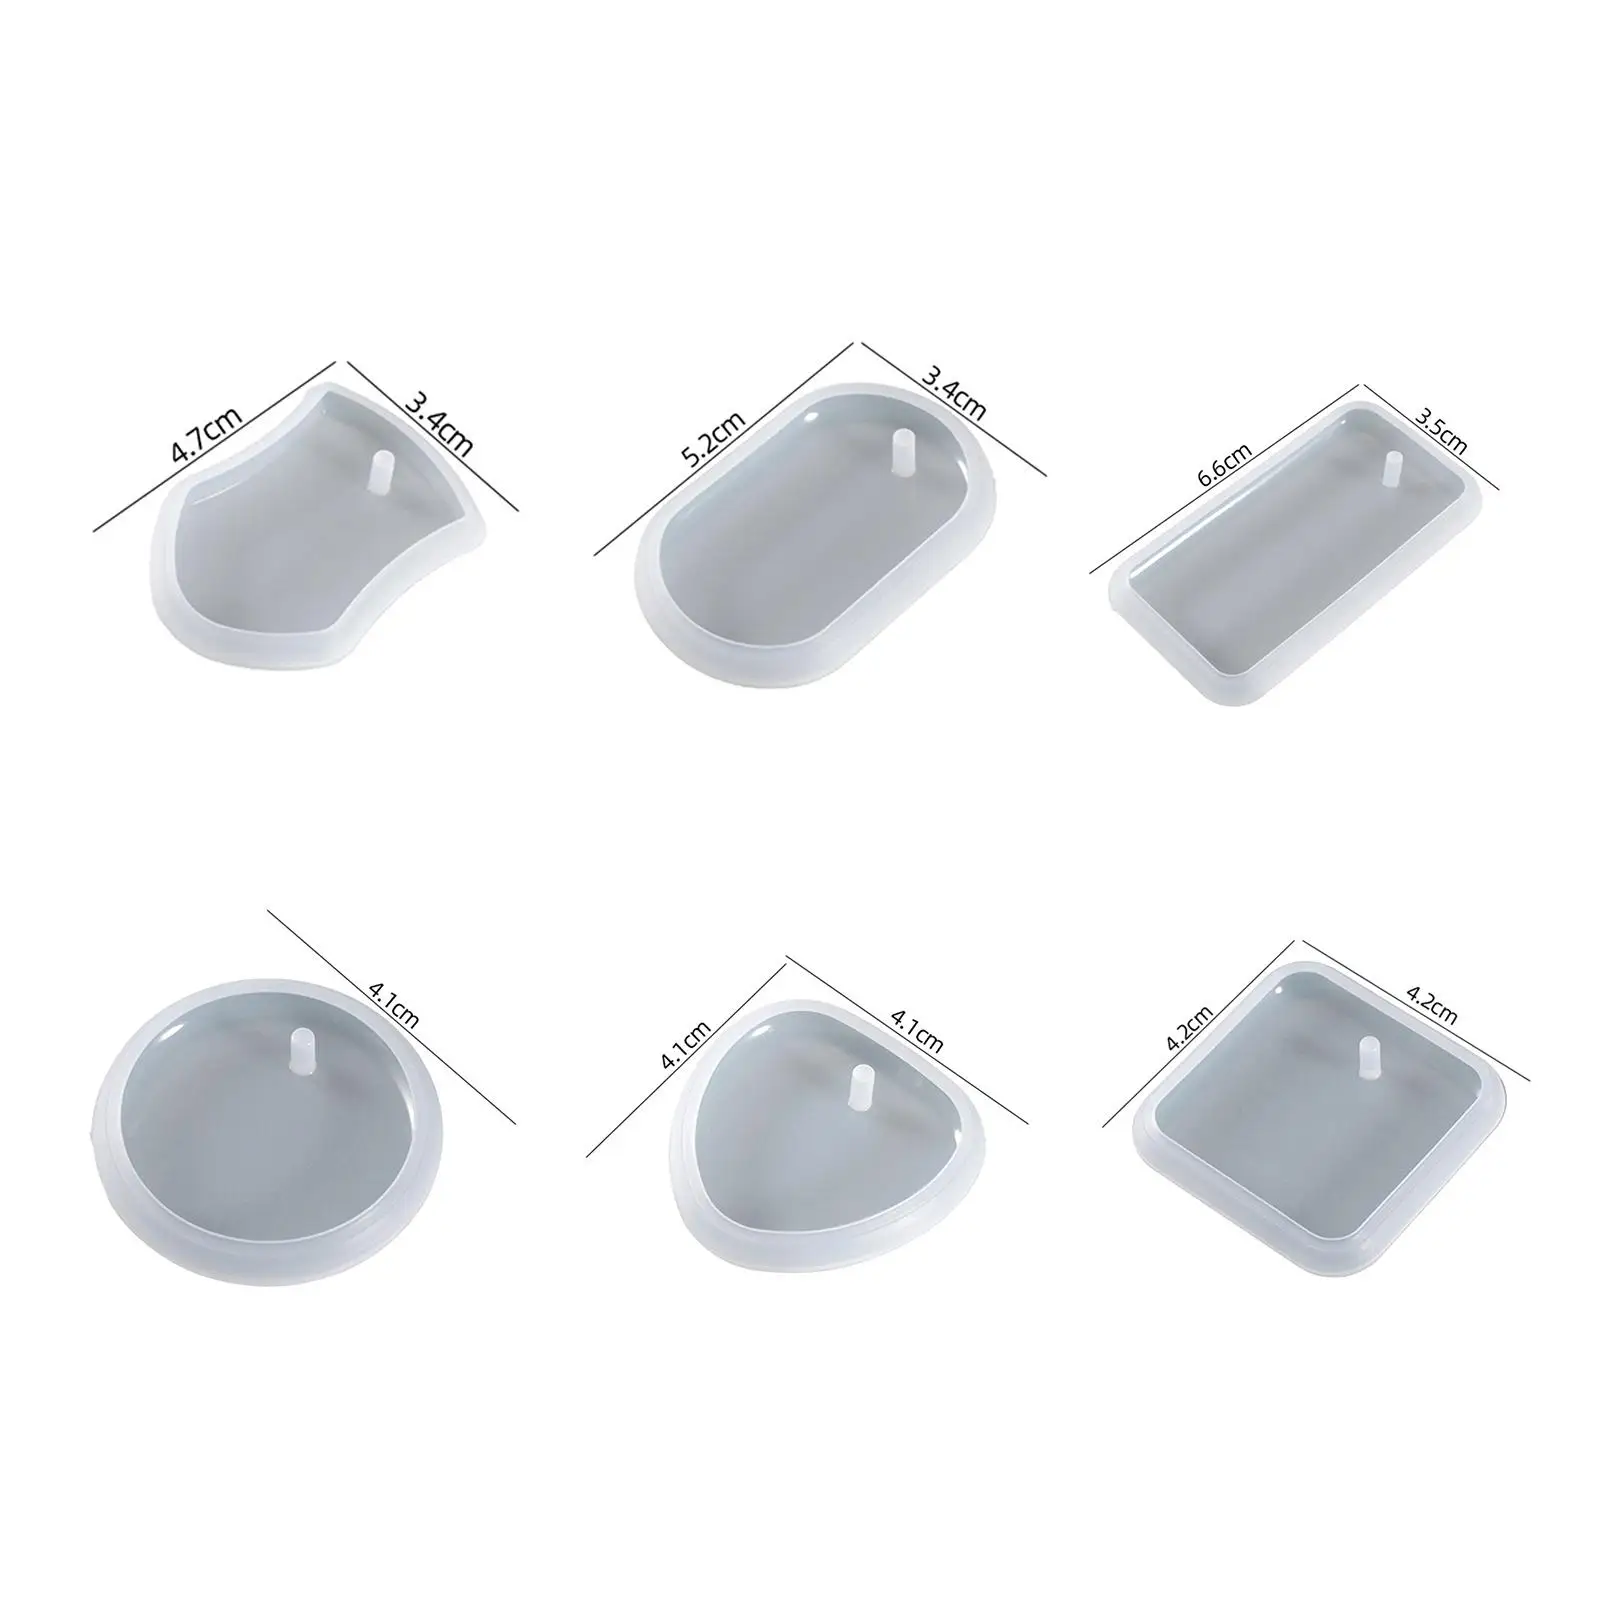 6 Pieces Silicone Resin Pendant Jewellery  with Hanging Hole for DIY Jewelry Craft Making - 6 Shapes